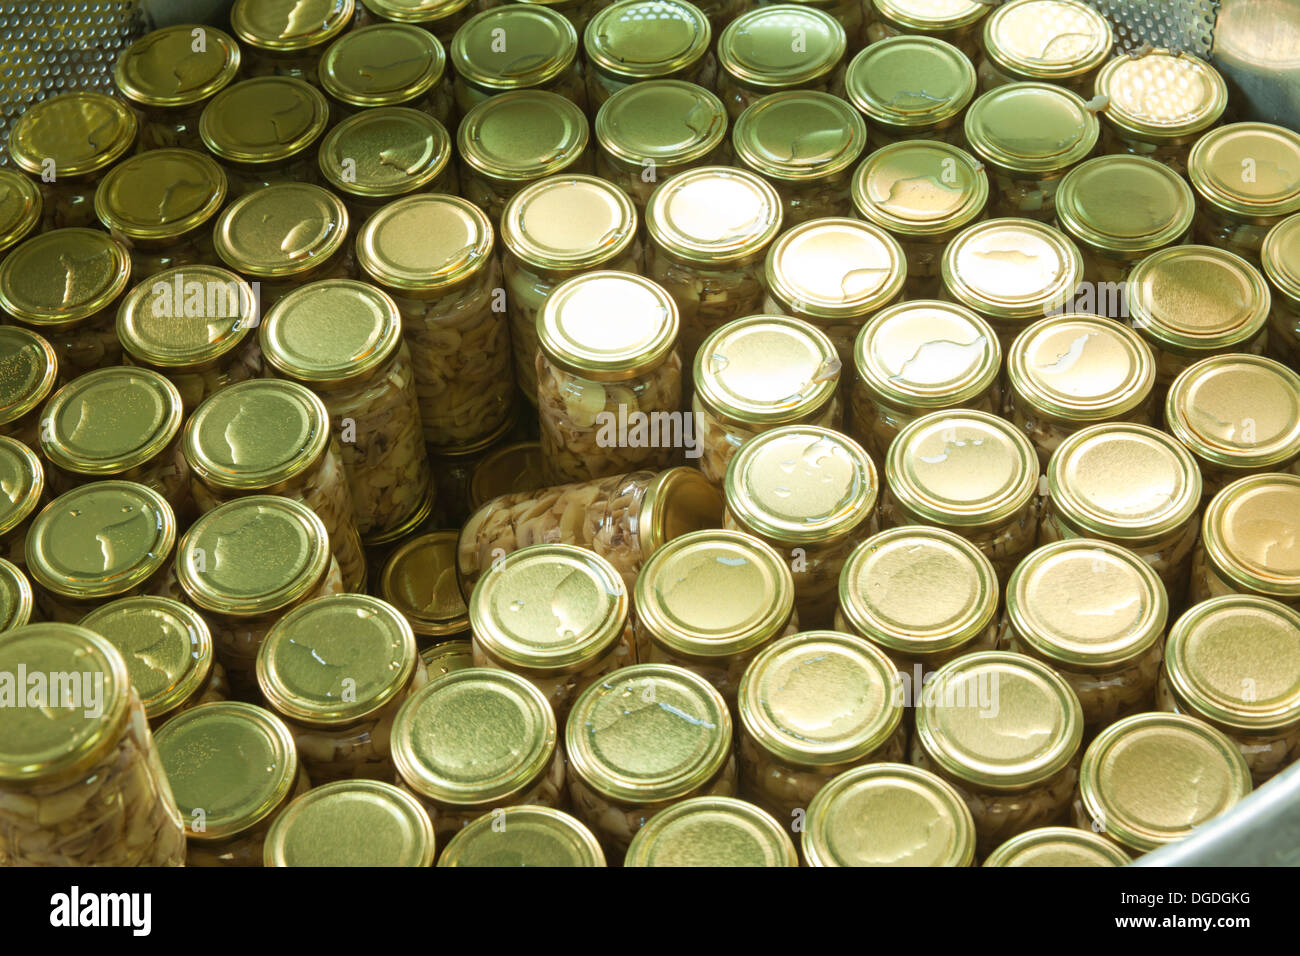 glass jars in the machine for pasteurization Stock Photo